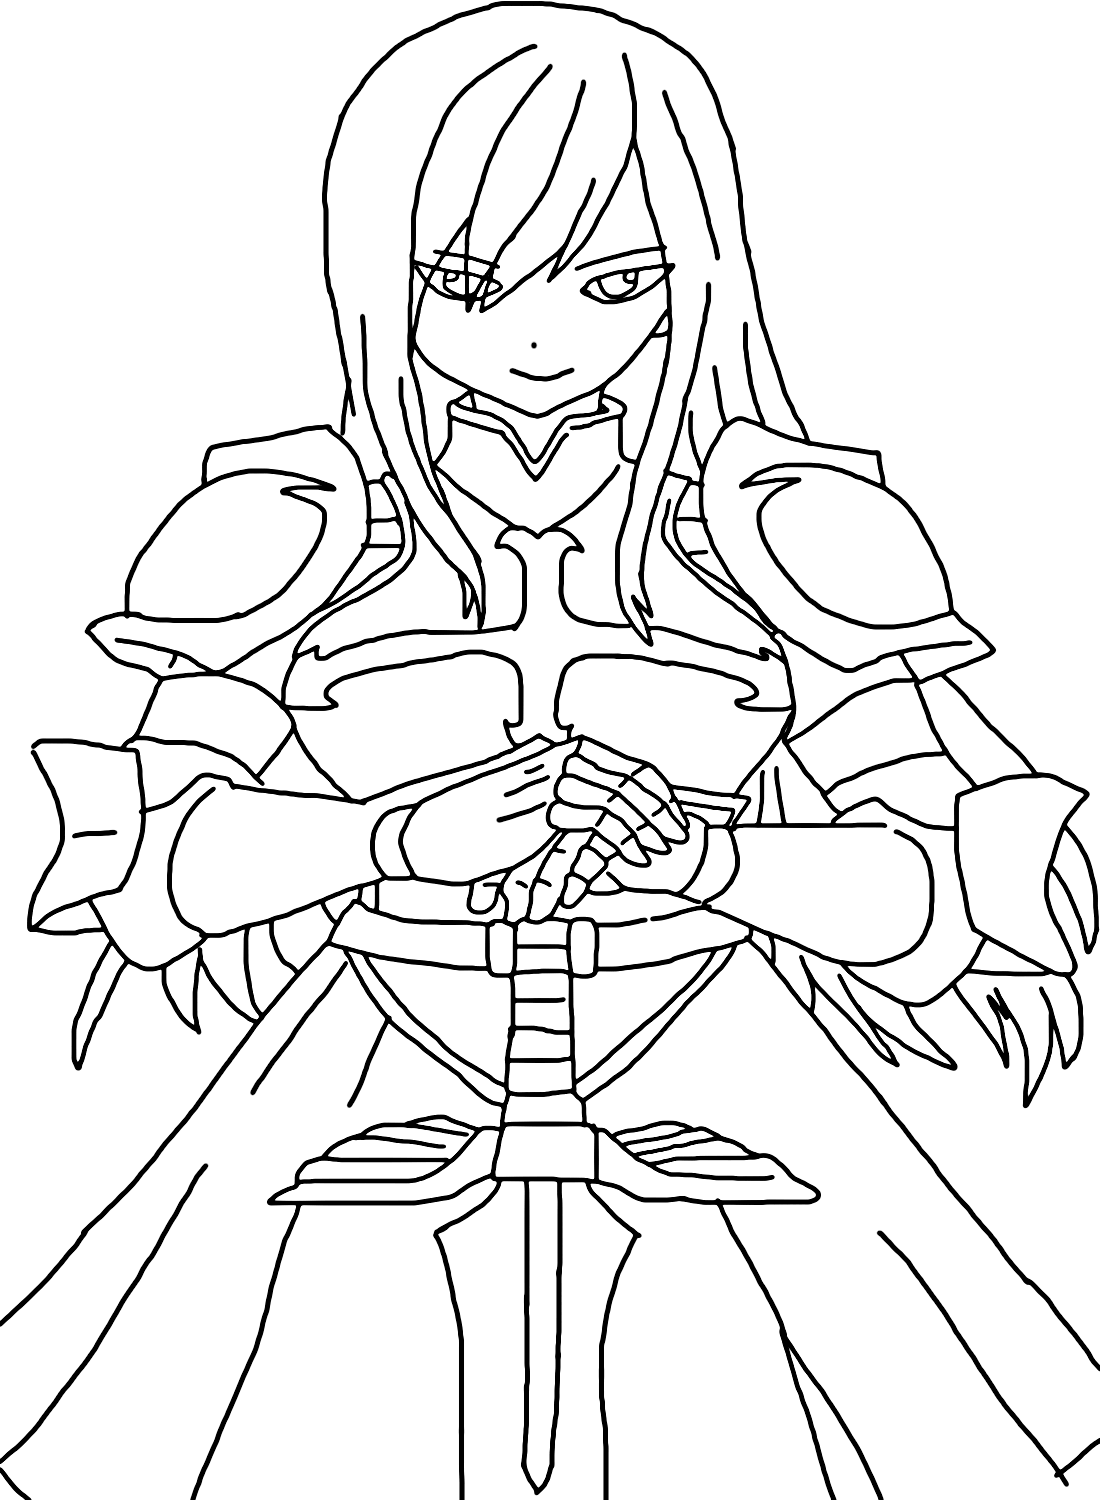 Erza Scarlet Fairy Tail Coloring Page from Erza Scarlet